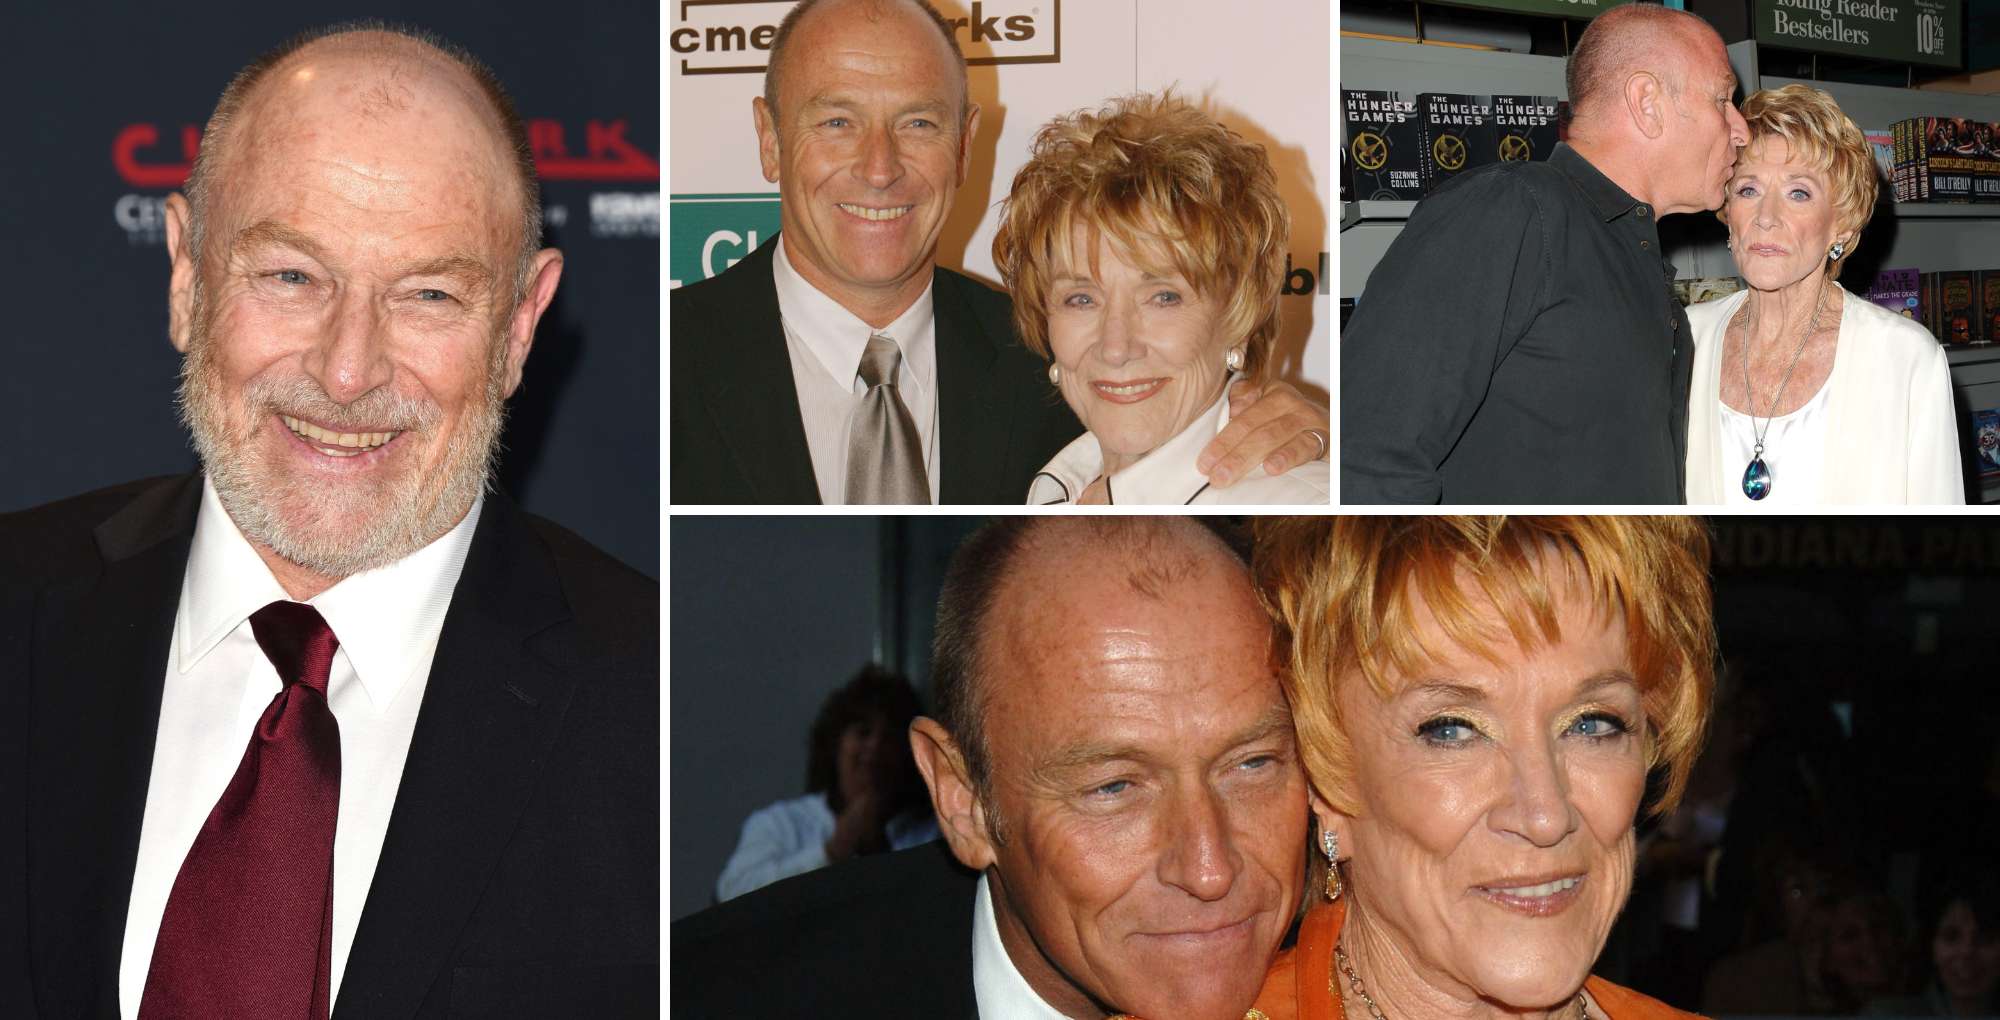 the young and the restless star corbin bernsen with his mom jeanne cooper collage.